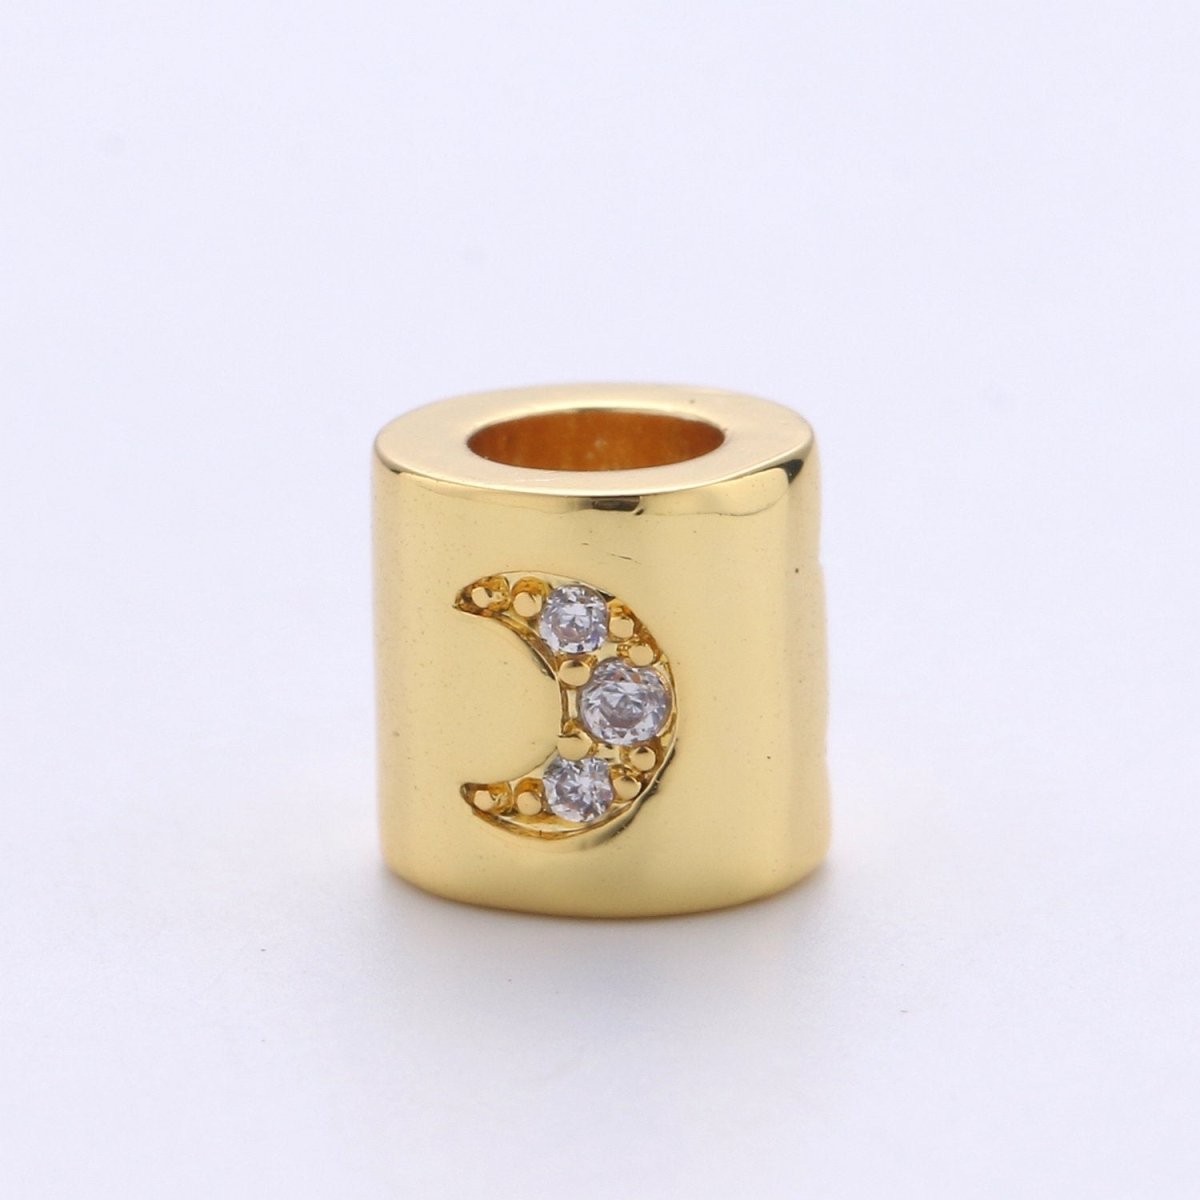 6mm Bead CZ Gold Filled Beads Celestial Beads Moon Sun Star Beads Micro Pave cylinder BeadsCharm for Bracelet Necklace Supply 4mm Hole B-270 B-271 B-272 - DLUXCA